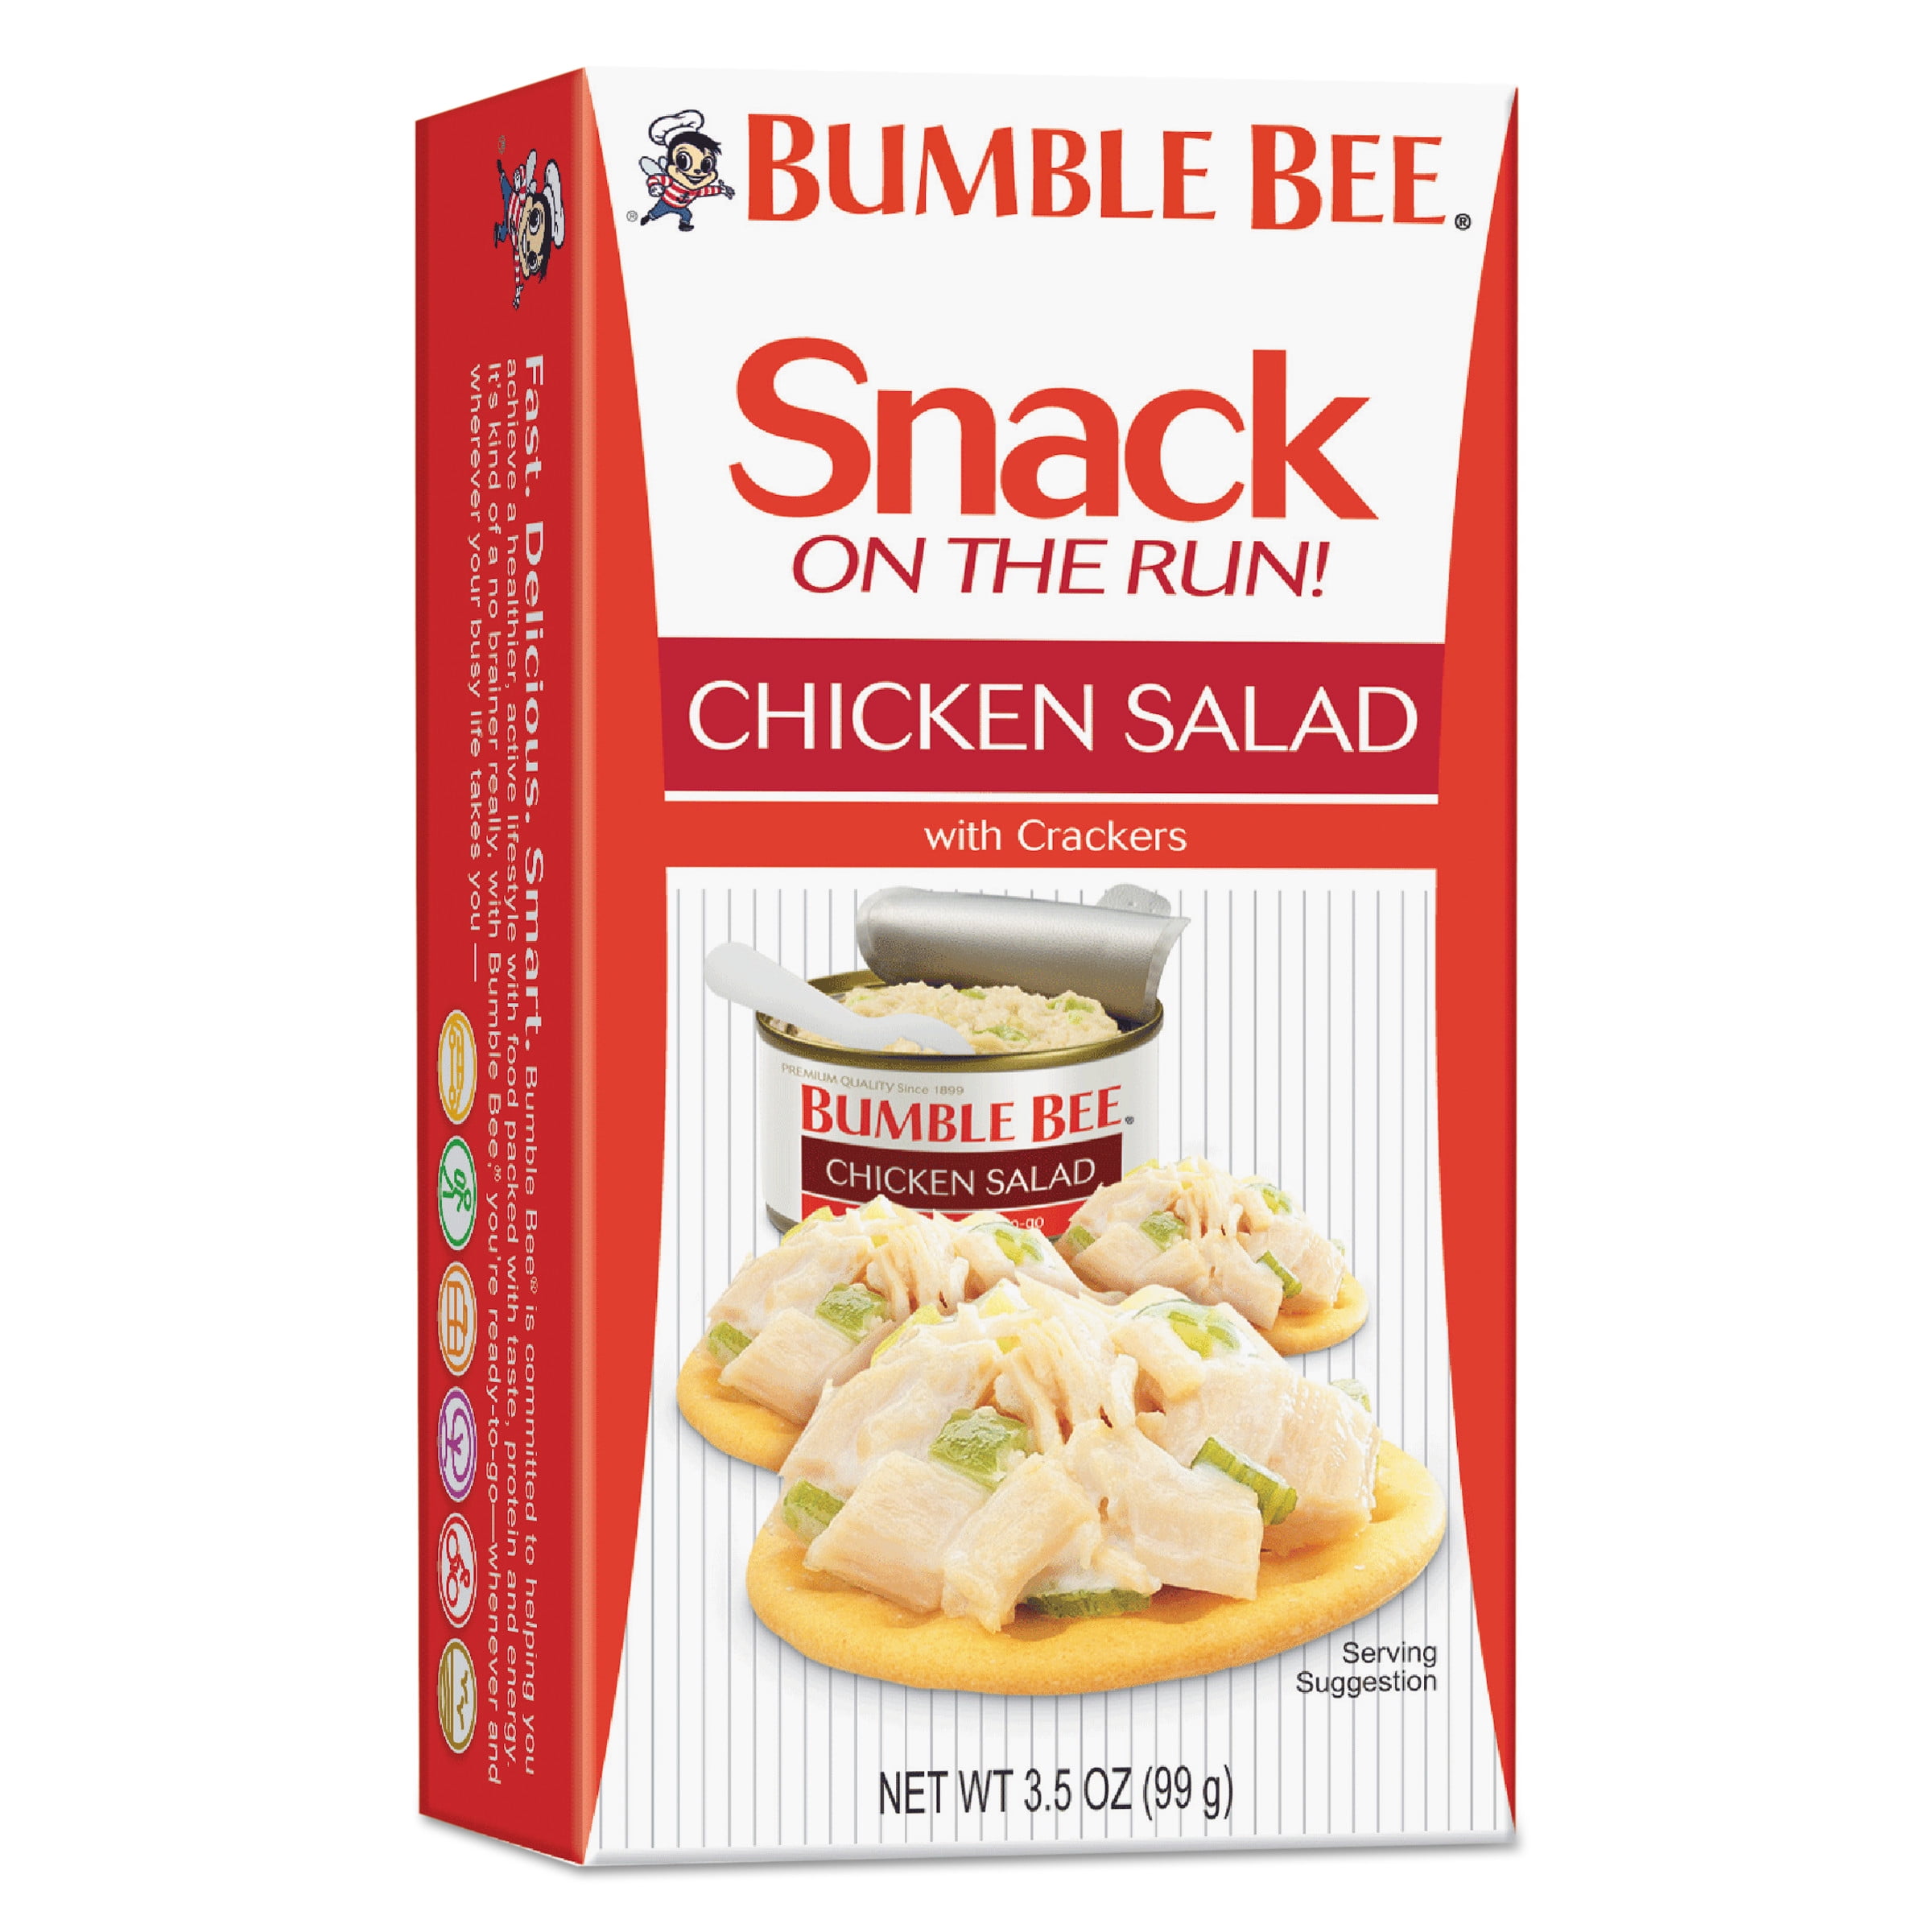 Bumble Bee Chicken Salad with Crackers, 3.5 oz